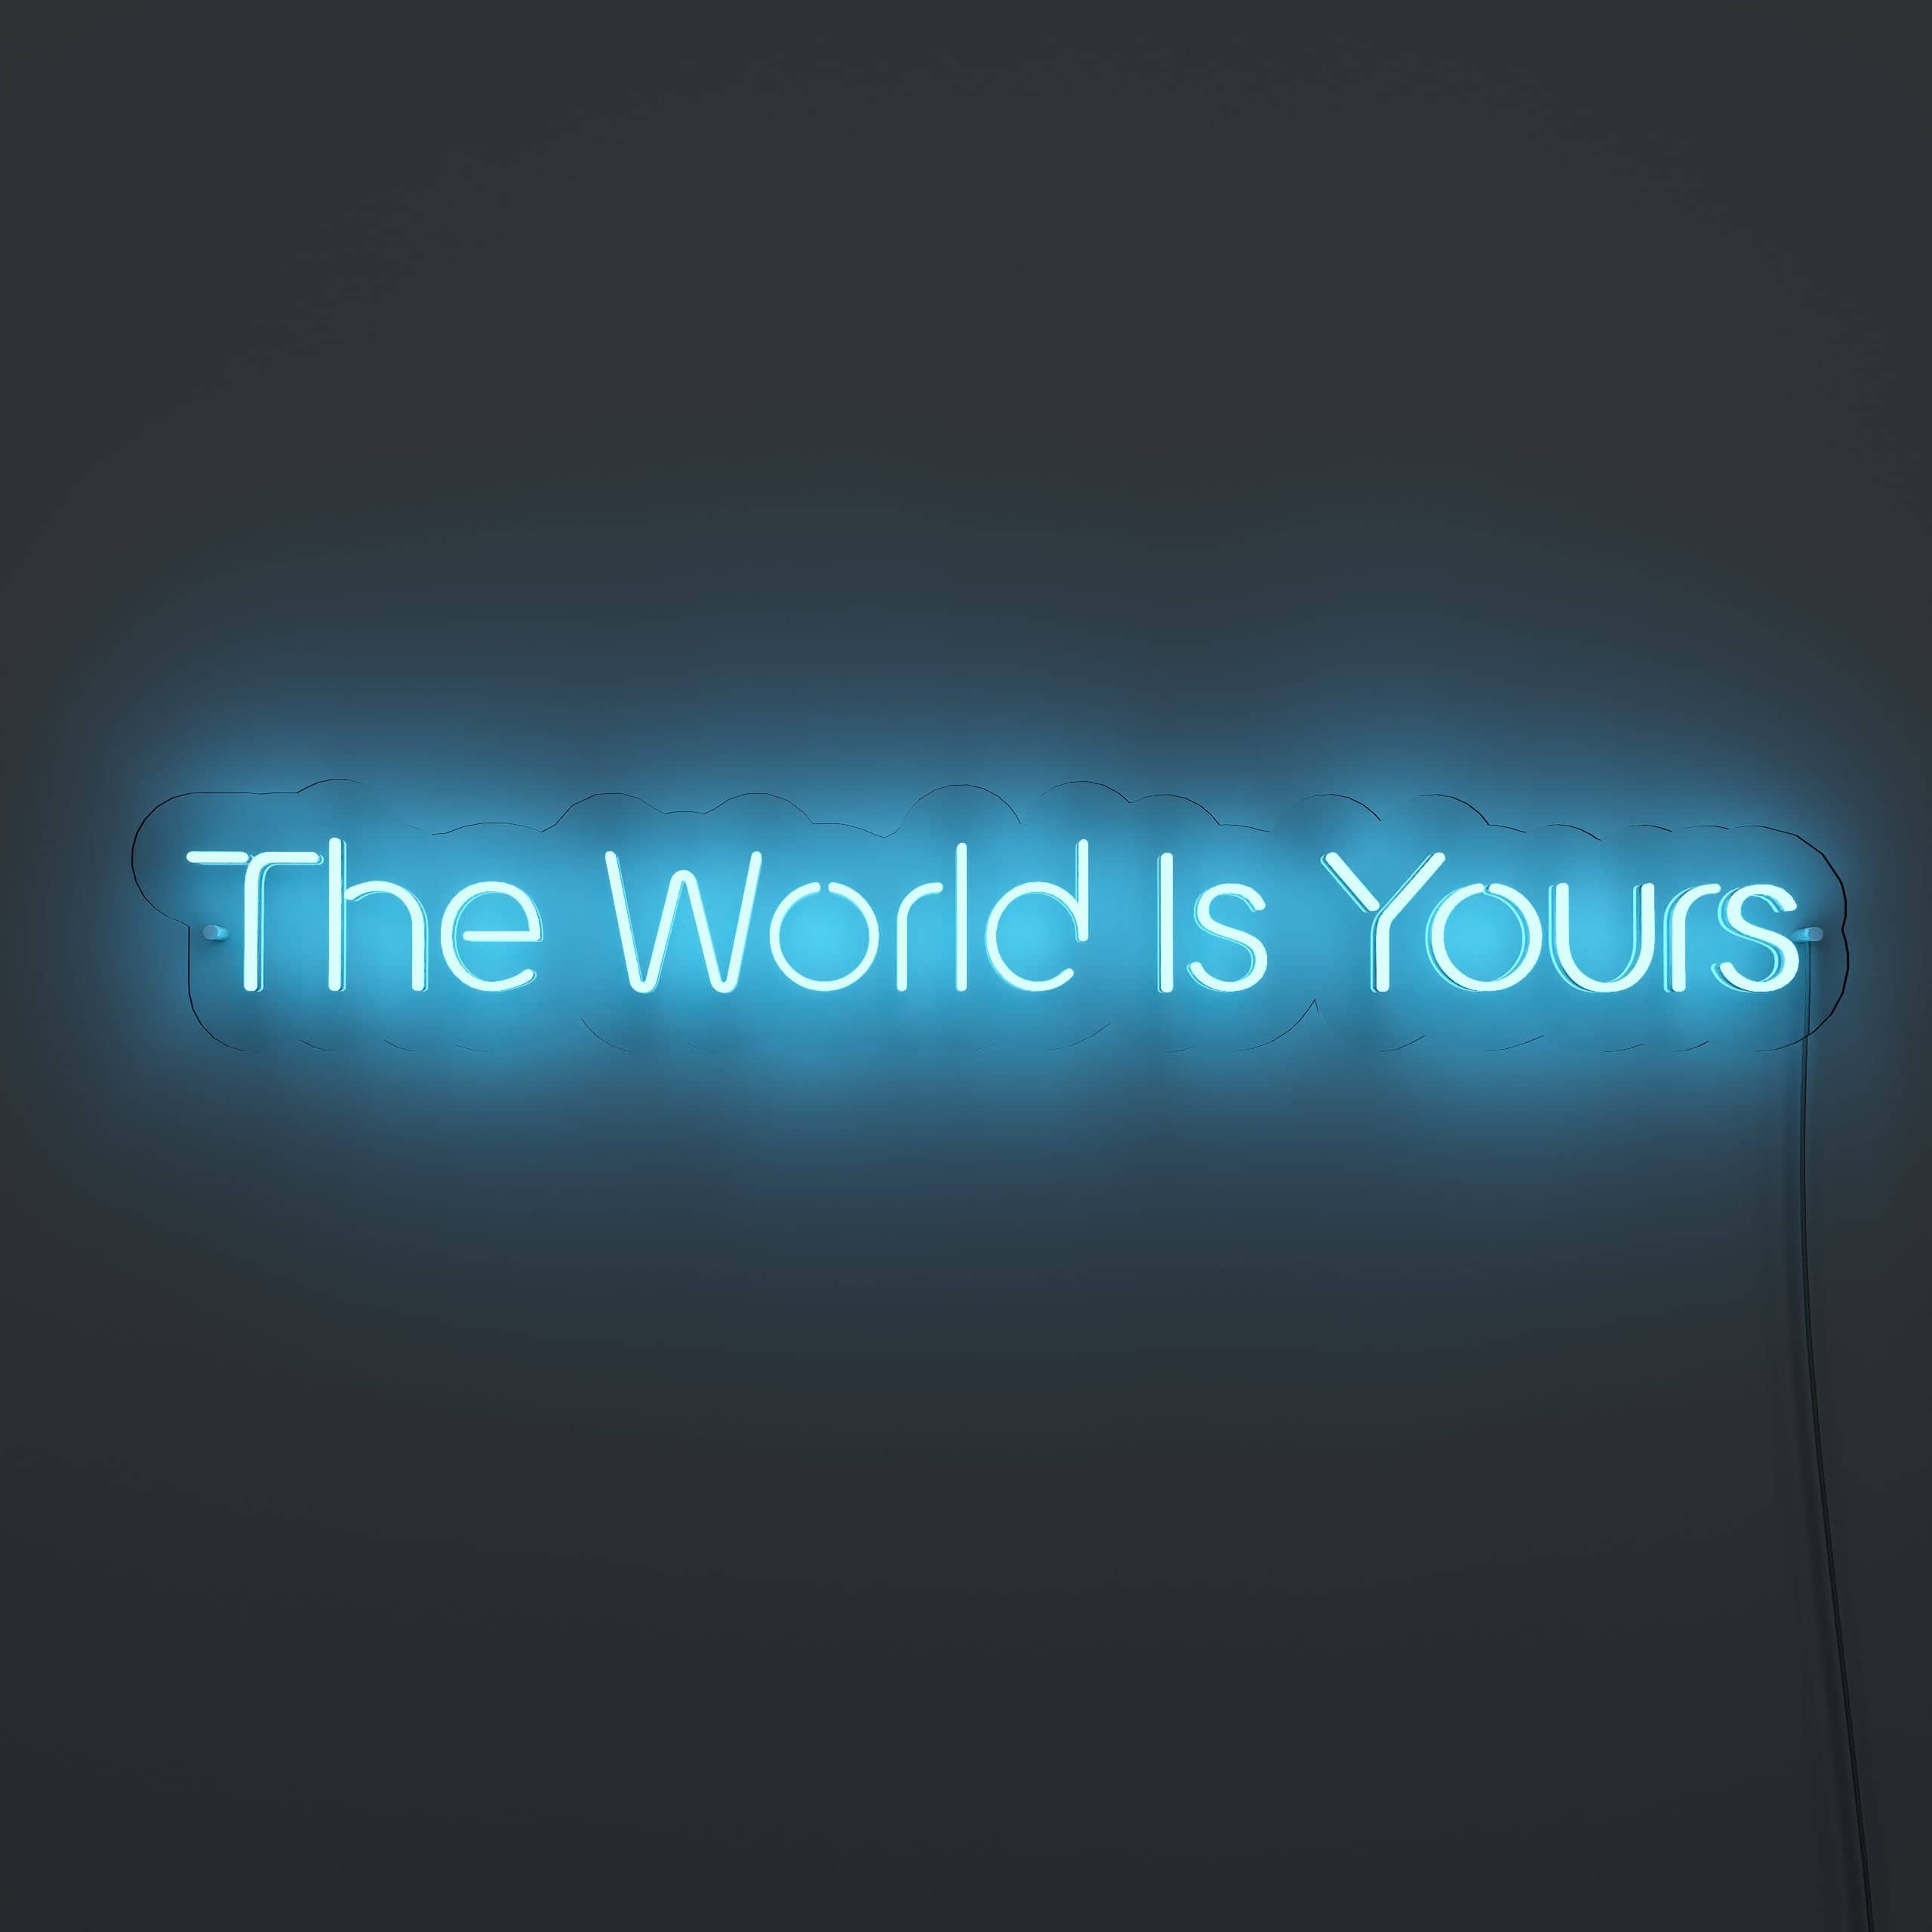 embrace-the-world's-abundance-and-power-neon-sign-lite